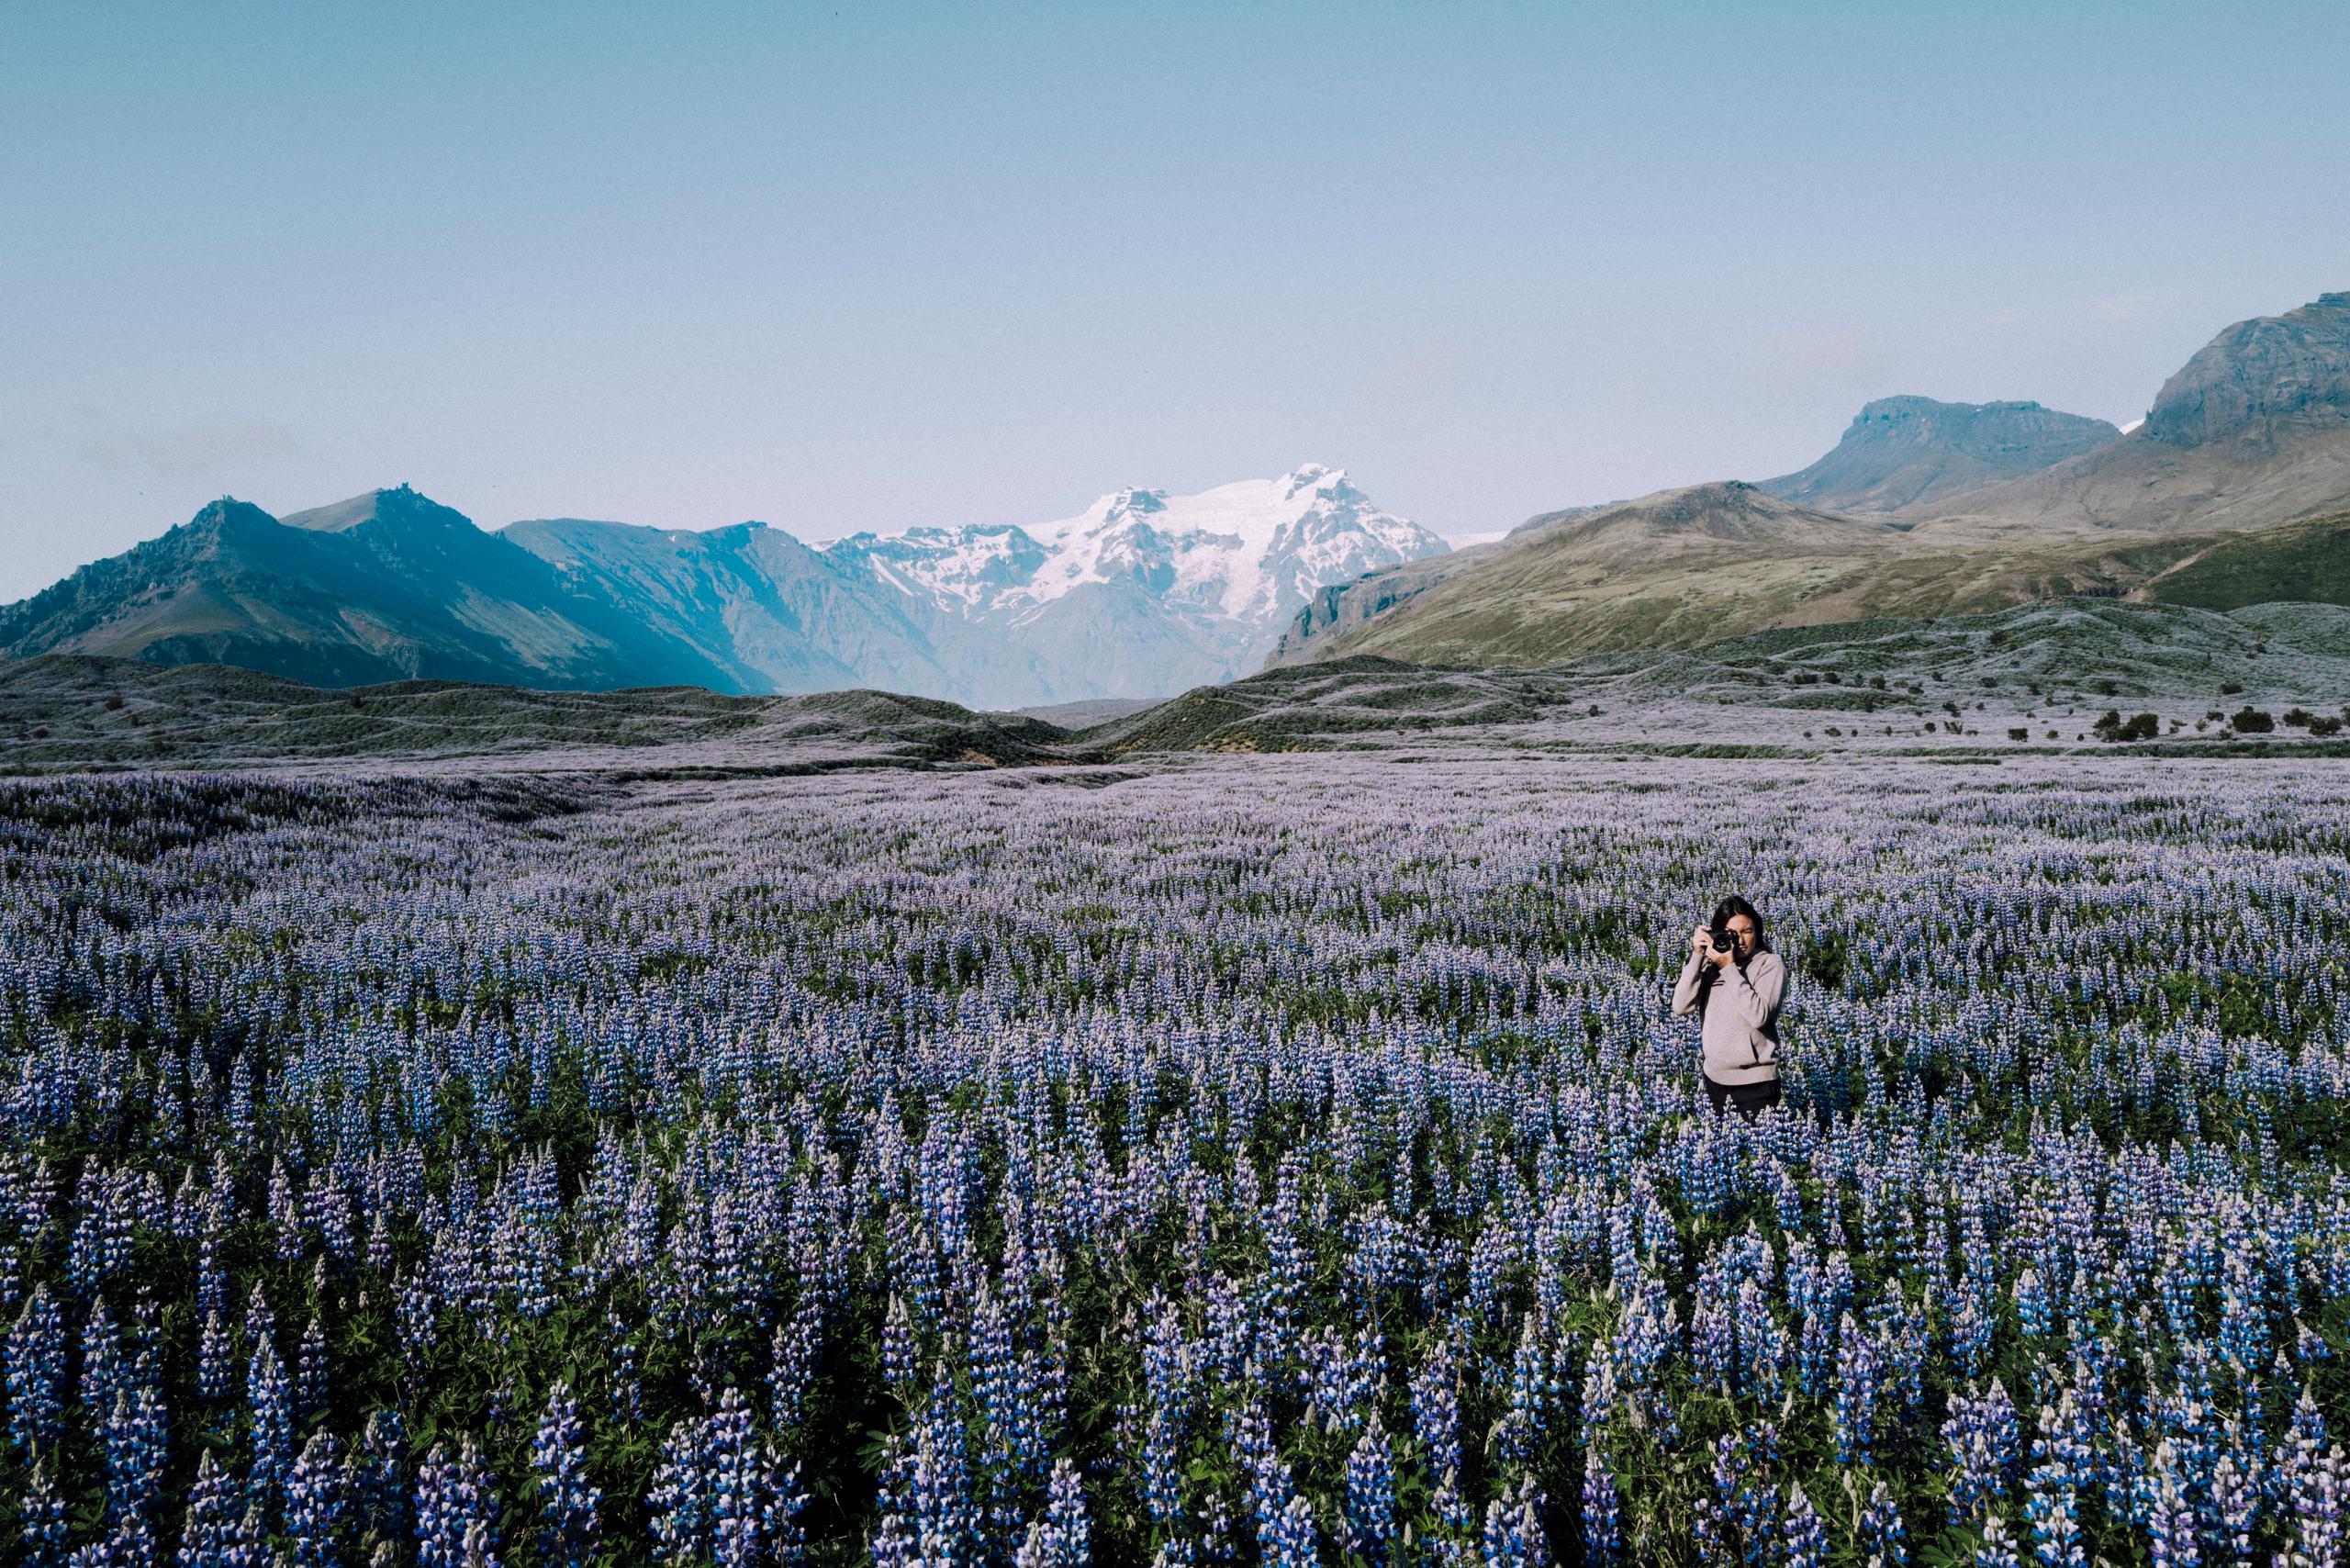 Woman holding up camera taking a picture standing in a field of lavender in Iceland with snowy mountains in background